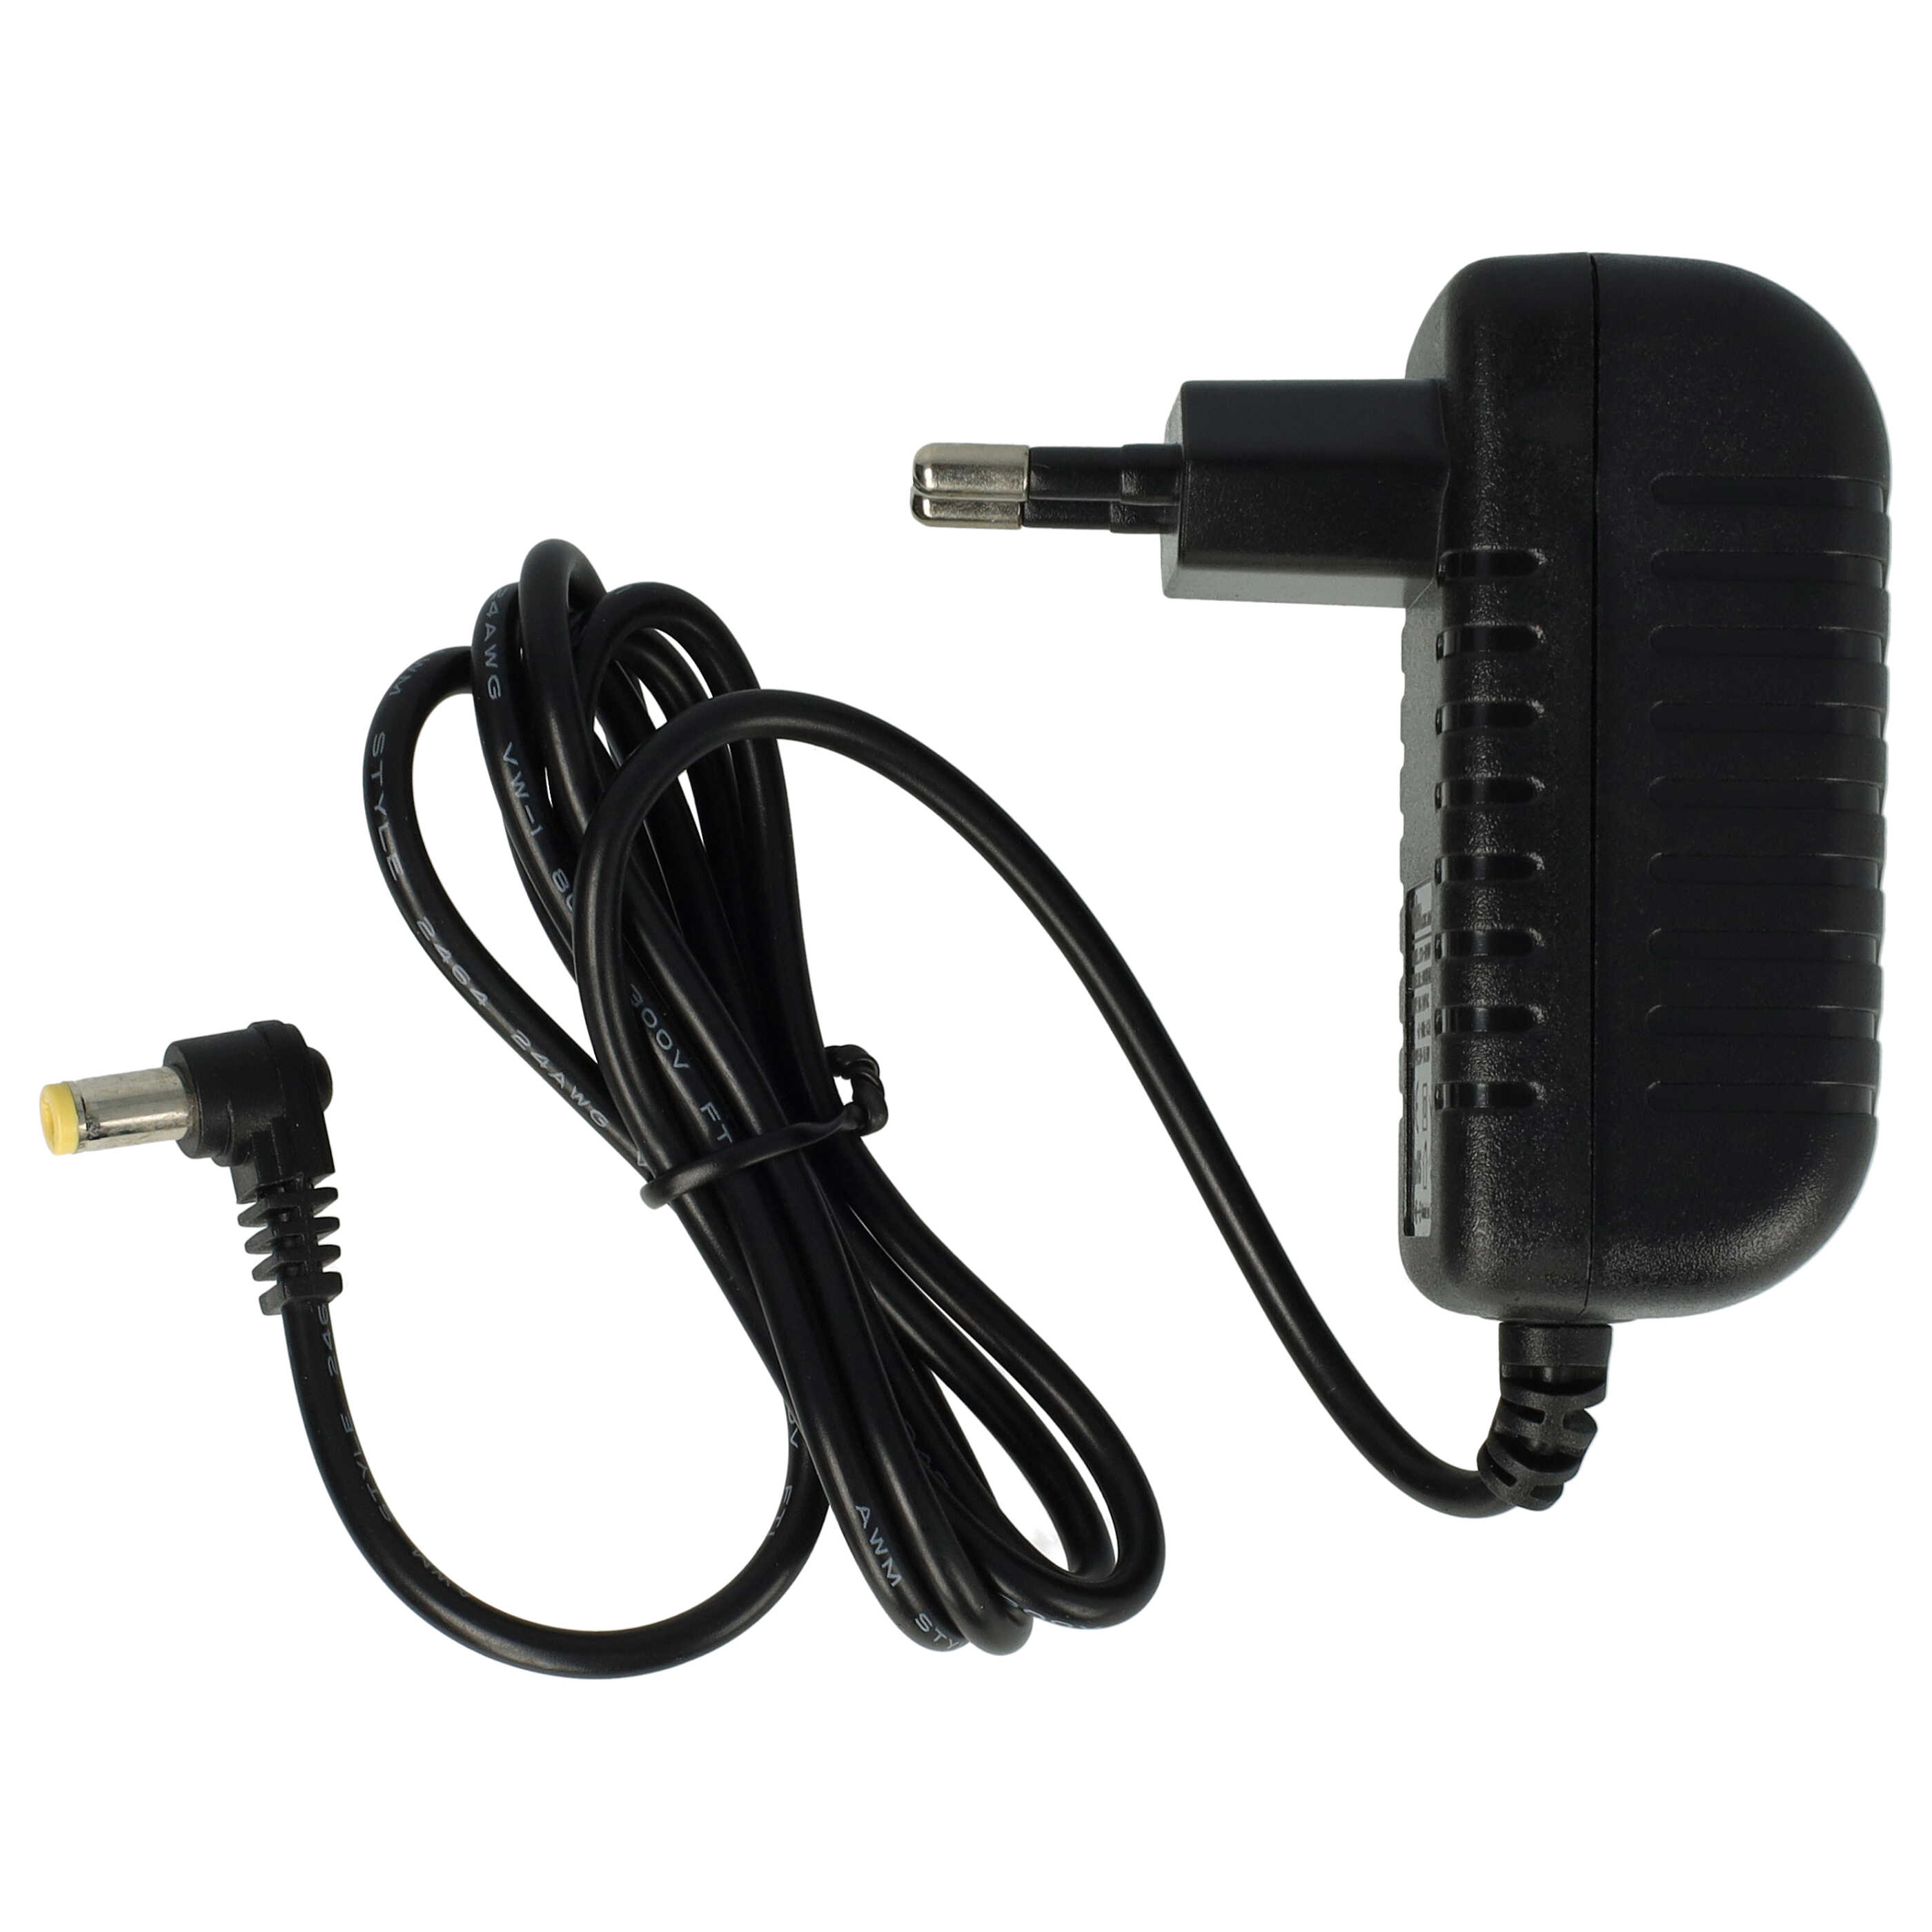 Mains Power Adapter replaces ENG 3A-052WP052 for Cisco router - 200 cm